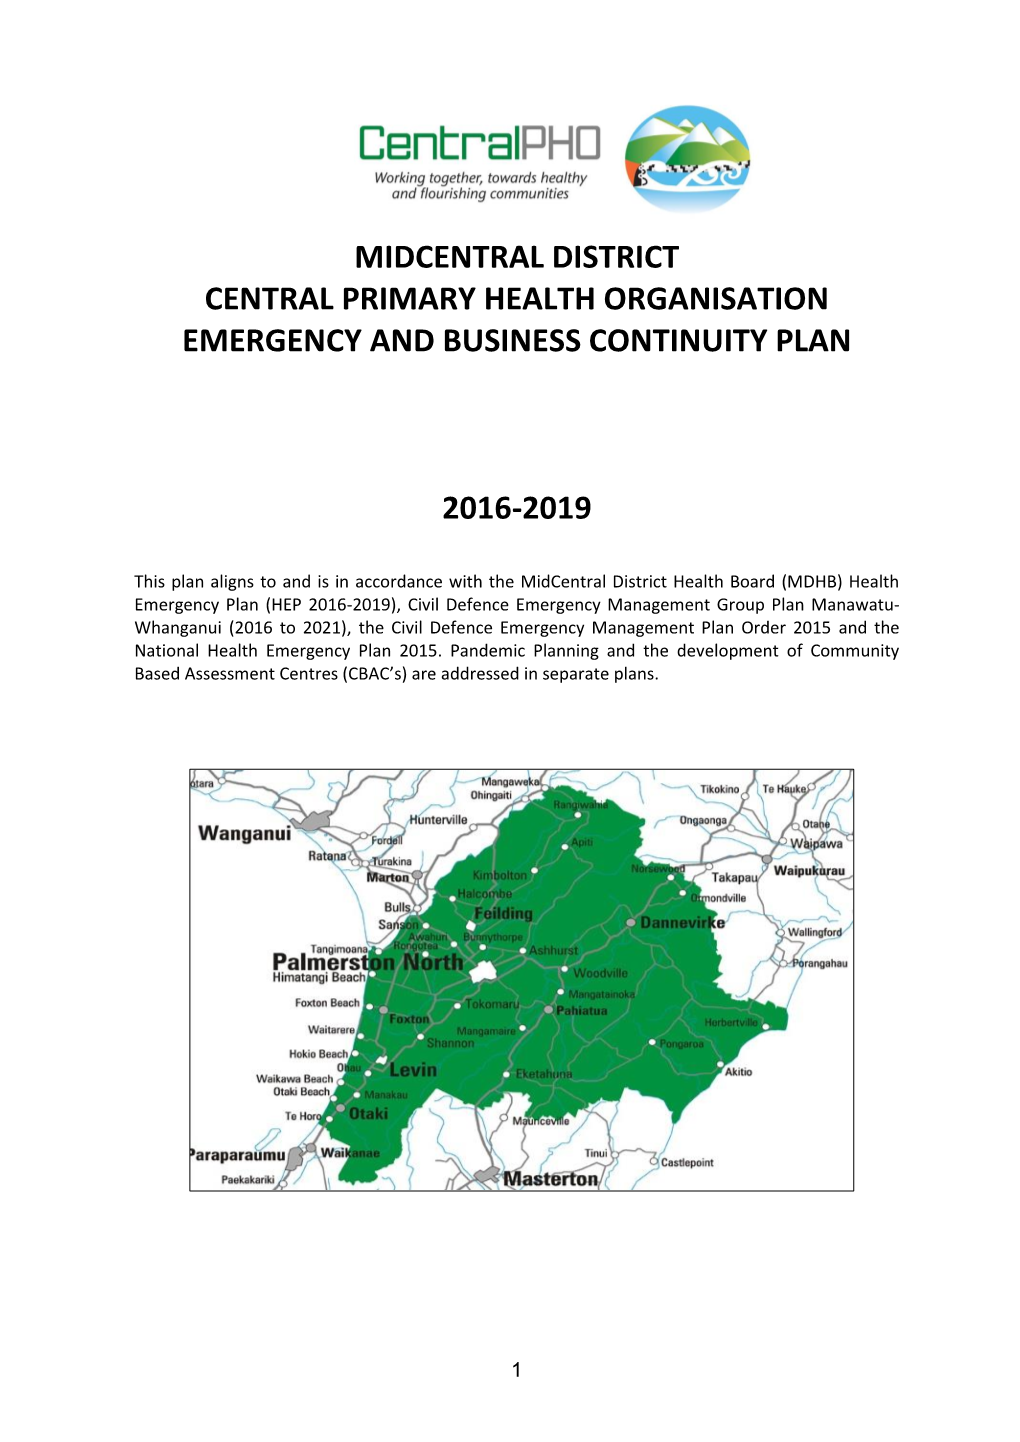 Midcentral District Central Primary Health Organisation Emergency and Business Continuity Plan